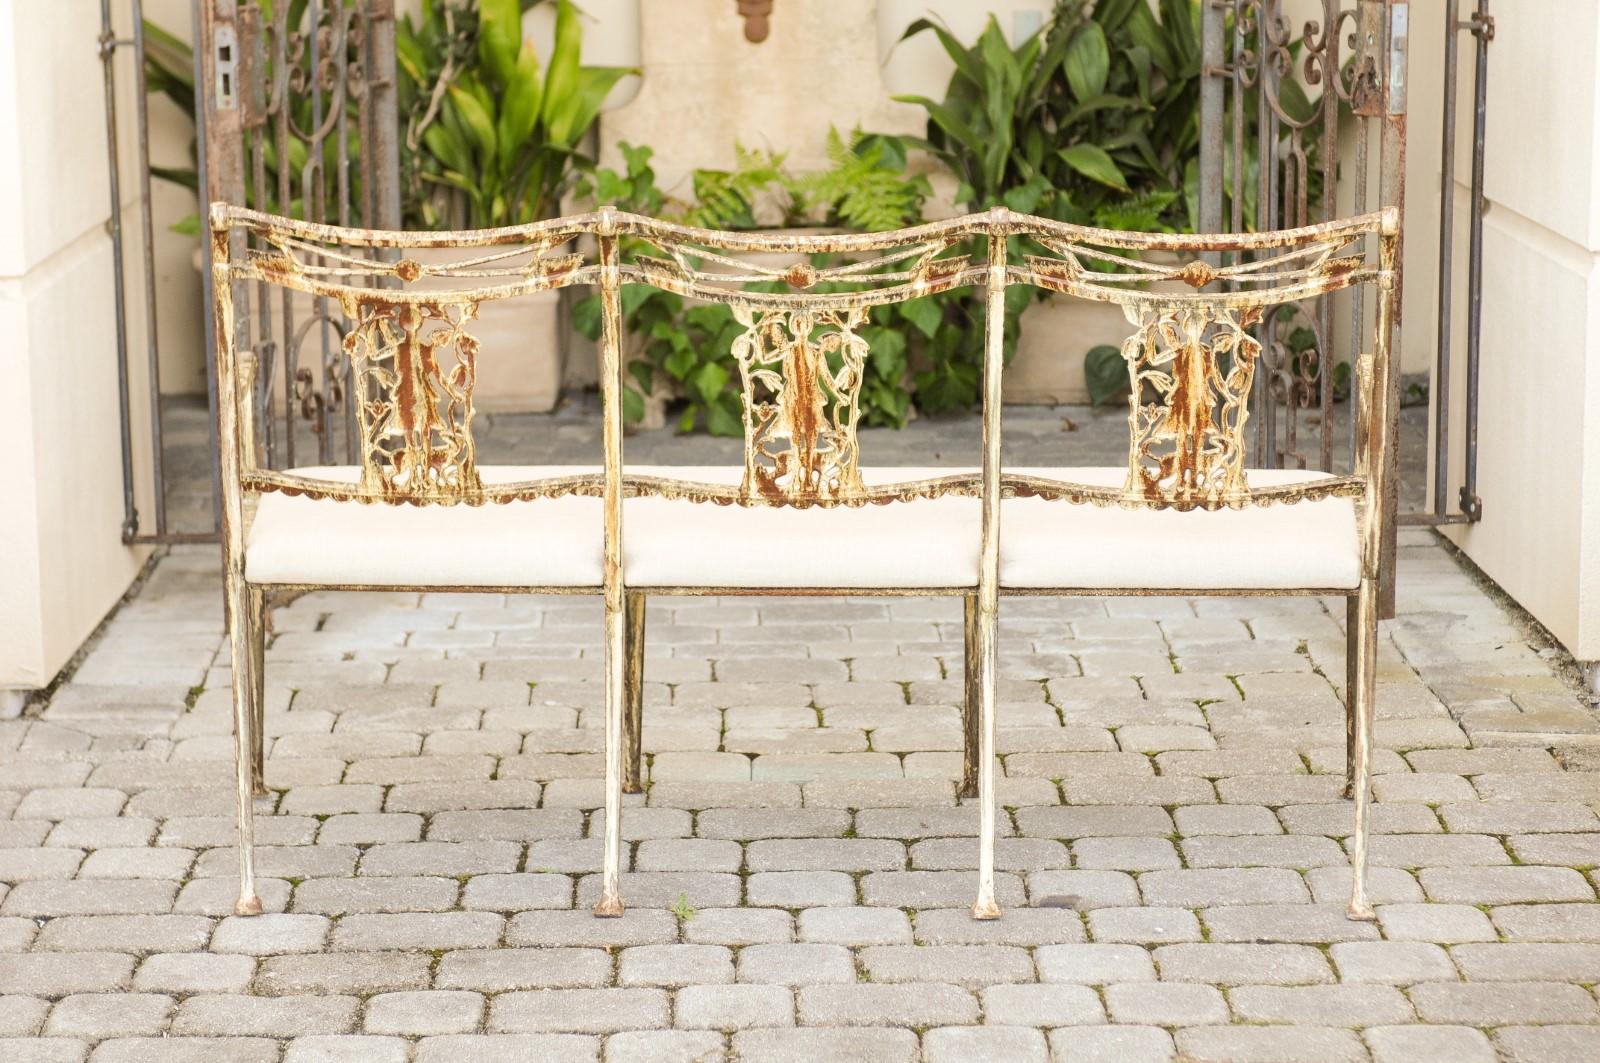 A Molla painted wrought iron upholstered garden bench from the mid-20th century depicting Diana, goddess of the hunt and her arrows. Created in the midcentury, this exquisite iron bench features a nicely weathered painted finish. Revealing its